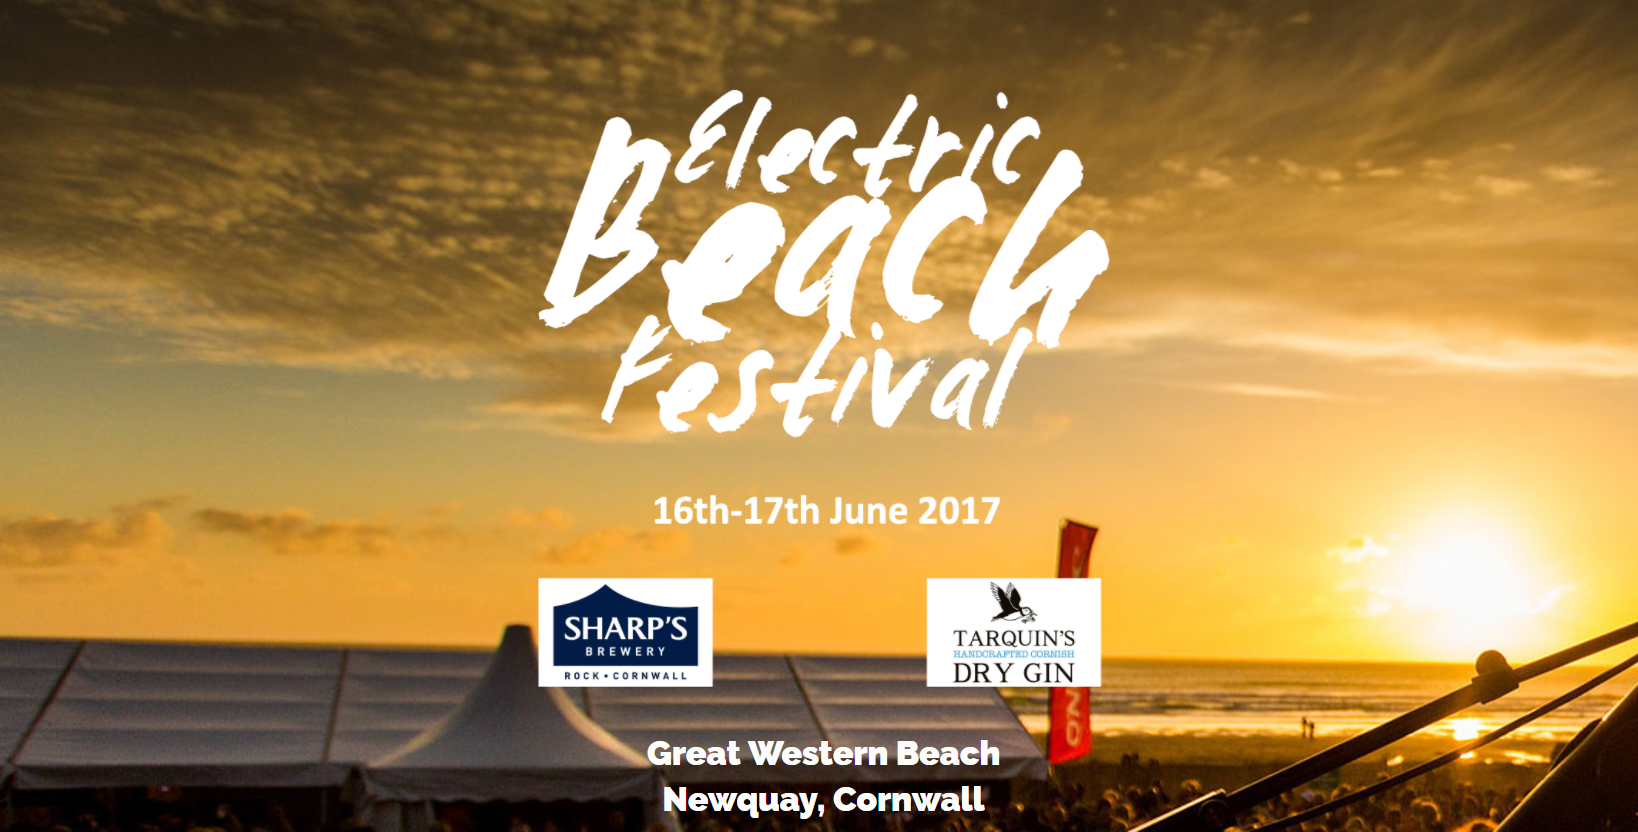 Win 2 free weekend tickets to Electric Beach Festival in Cornwall